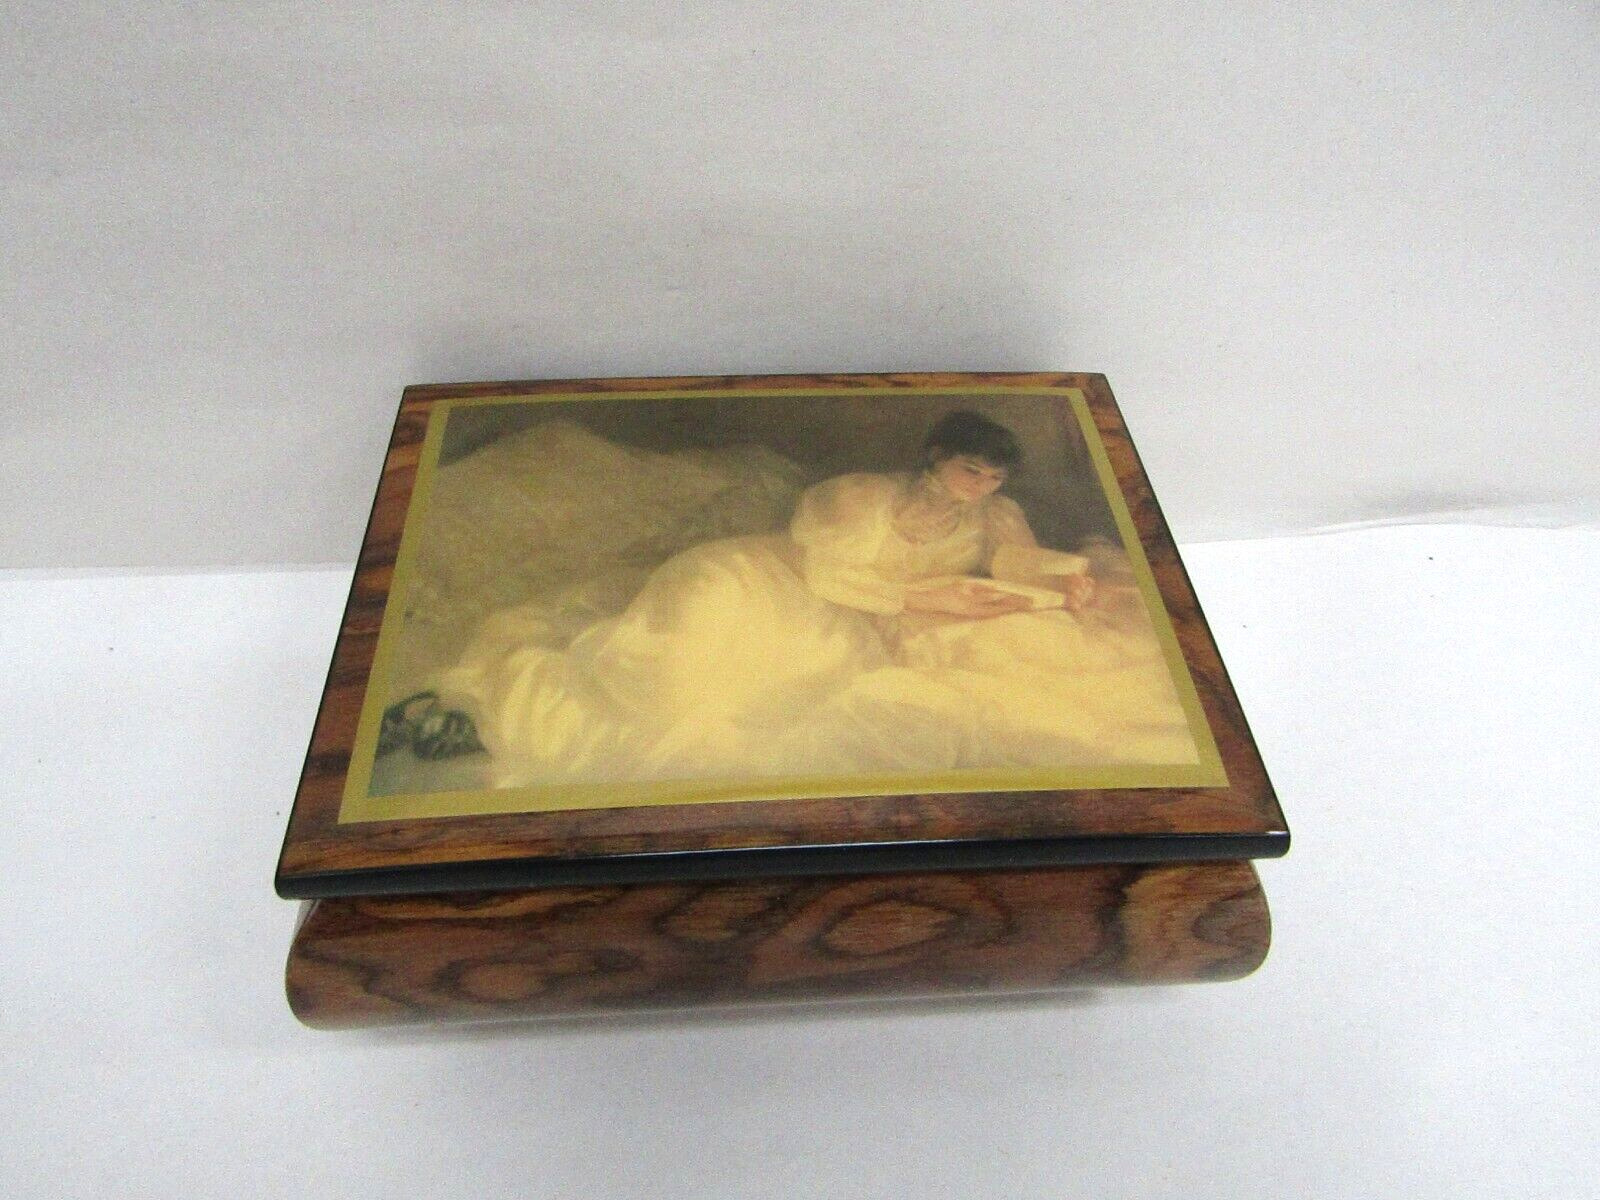 Vintage Ercolano Memory Music Box Made in Italy